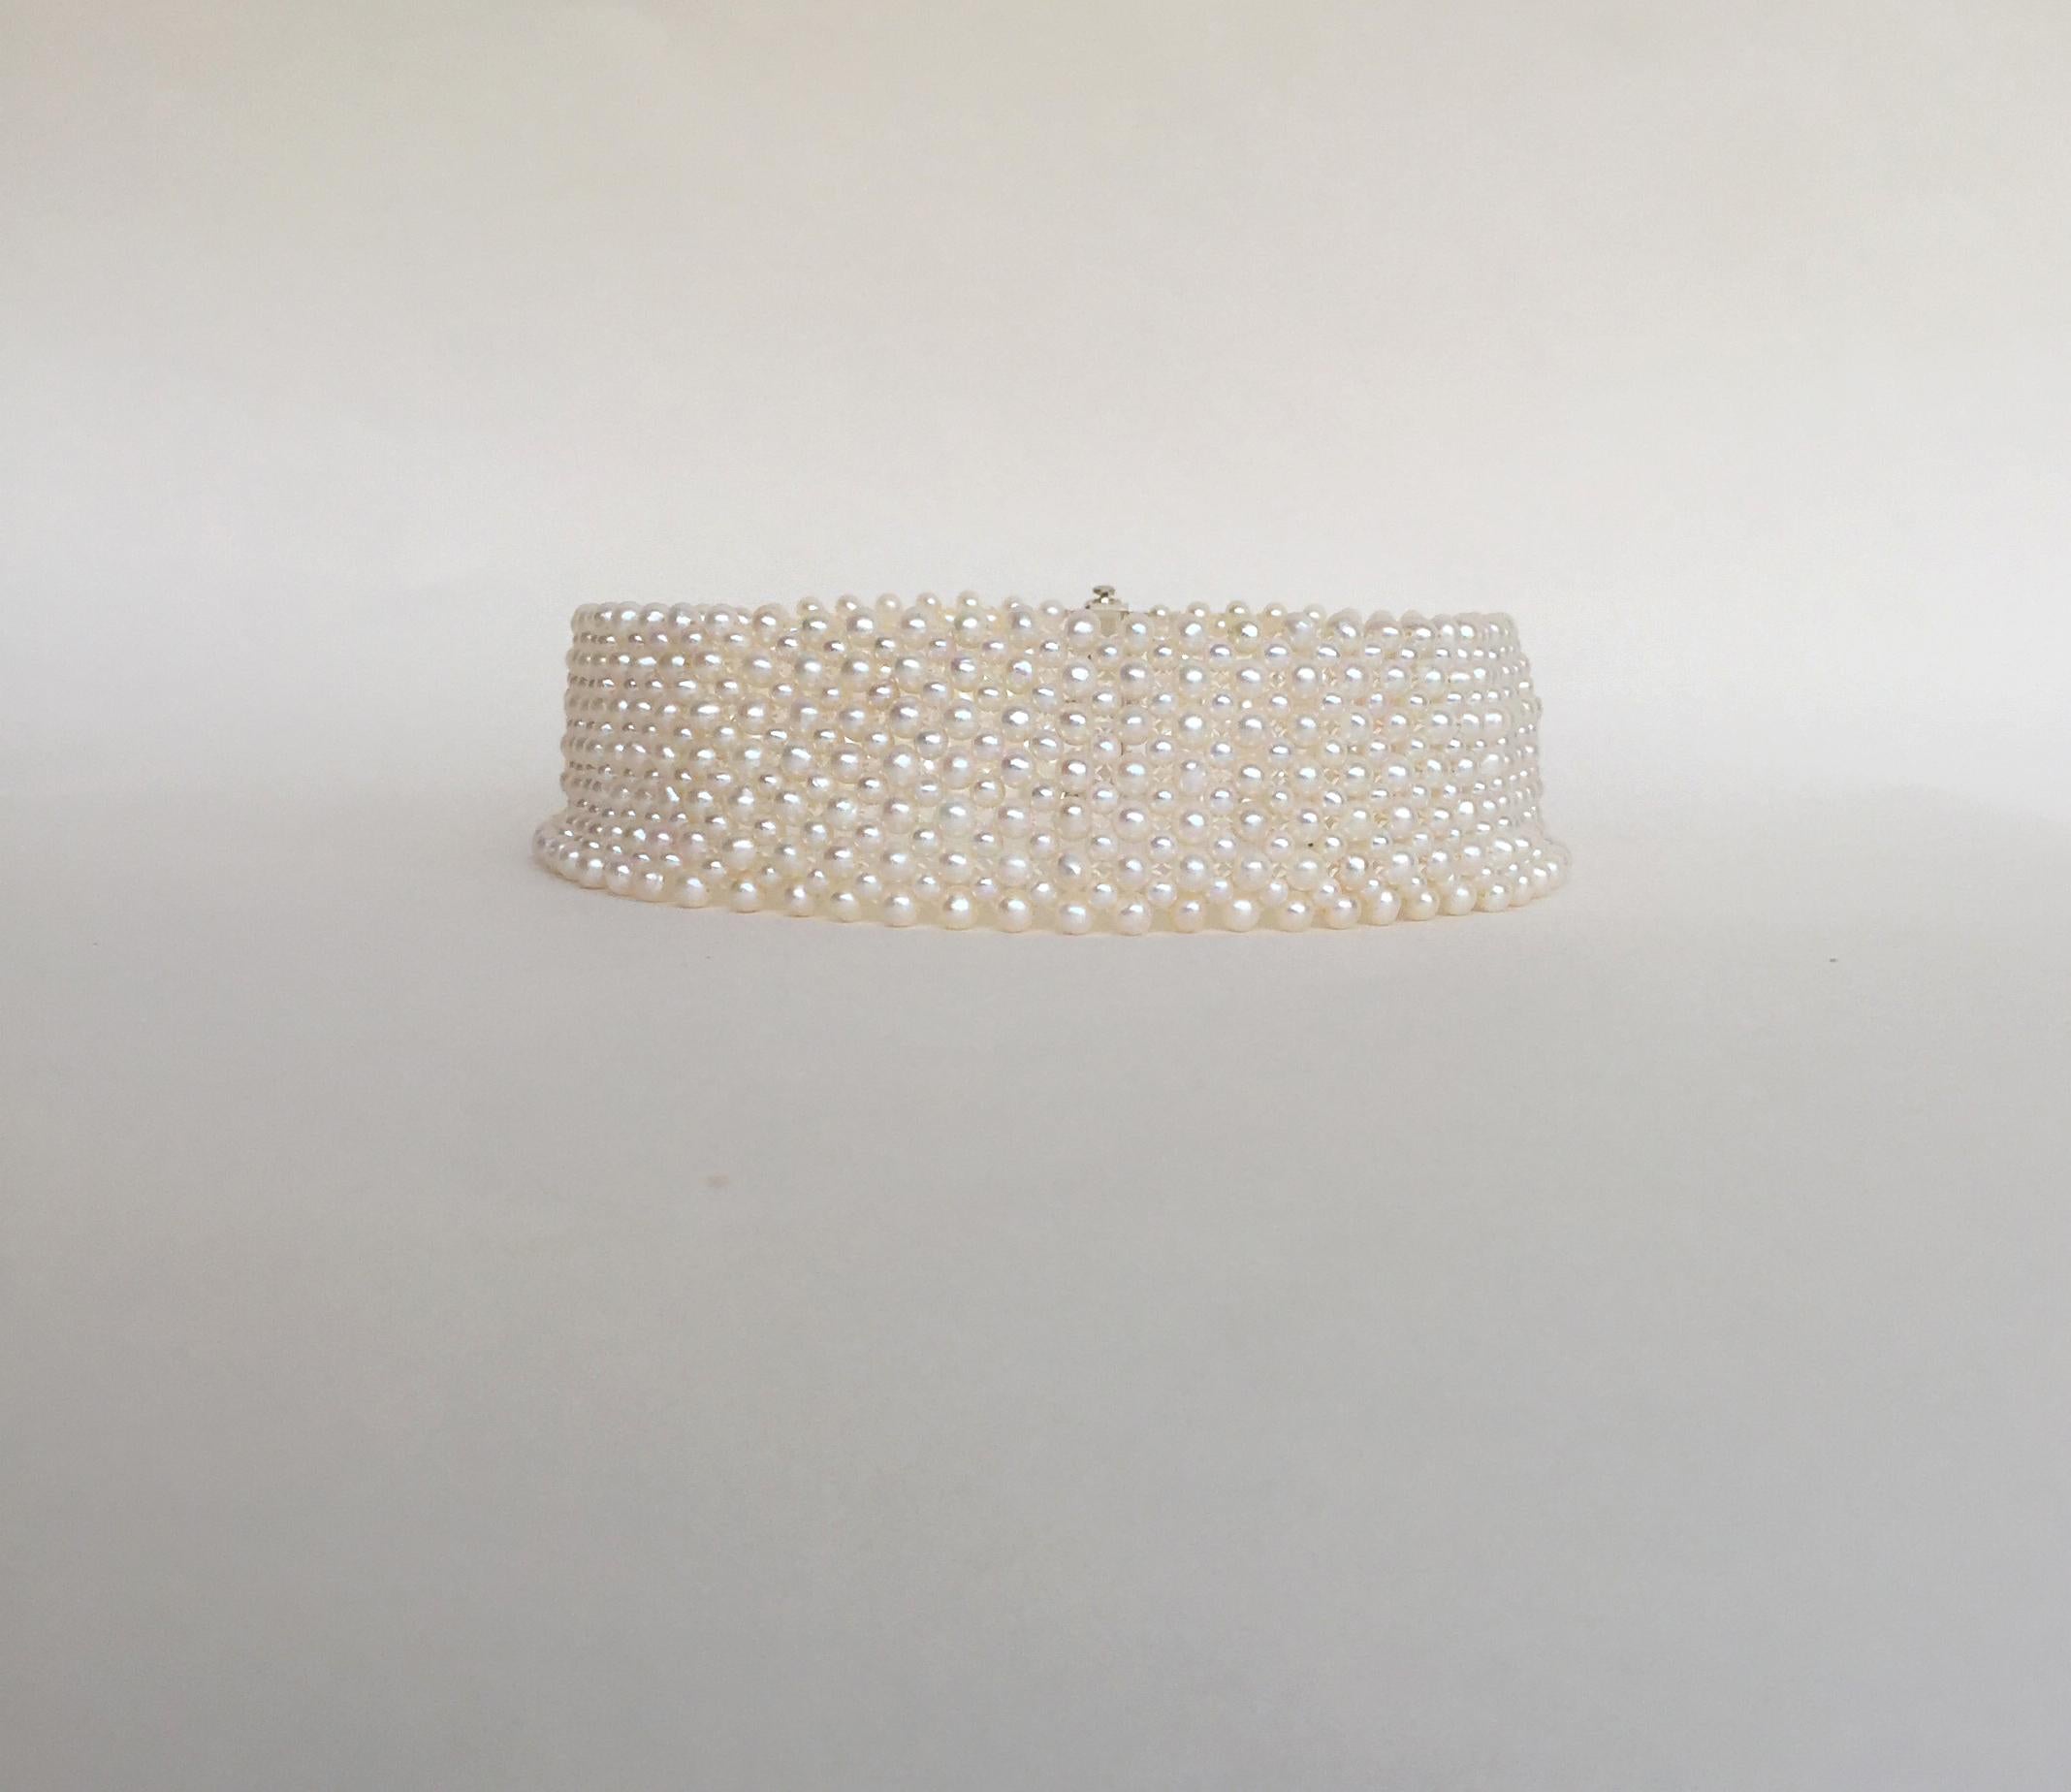 Woven Round White Pearl Wide Choker with Sterling Silver Sliding Clasp 4